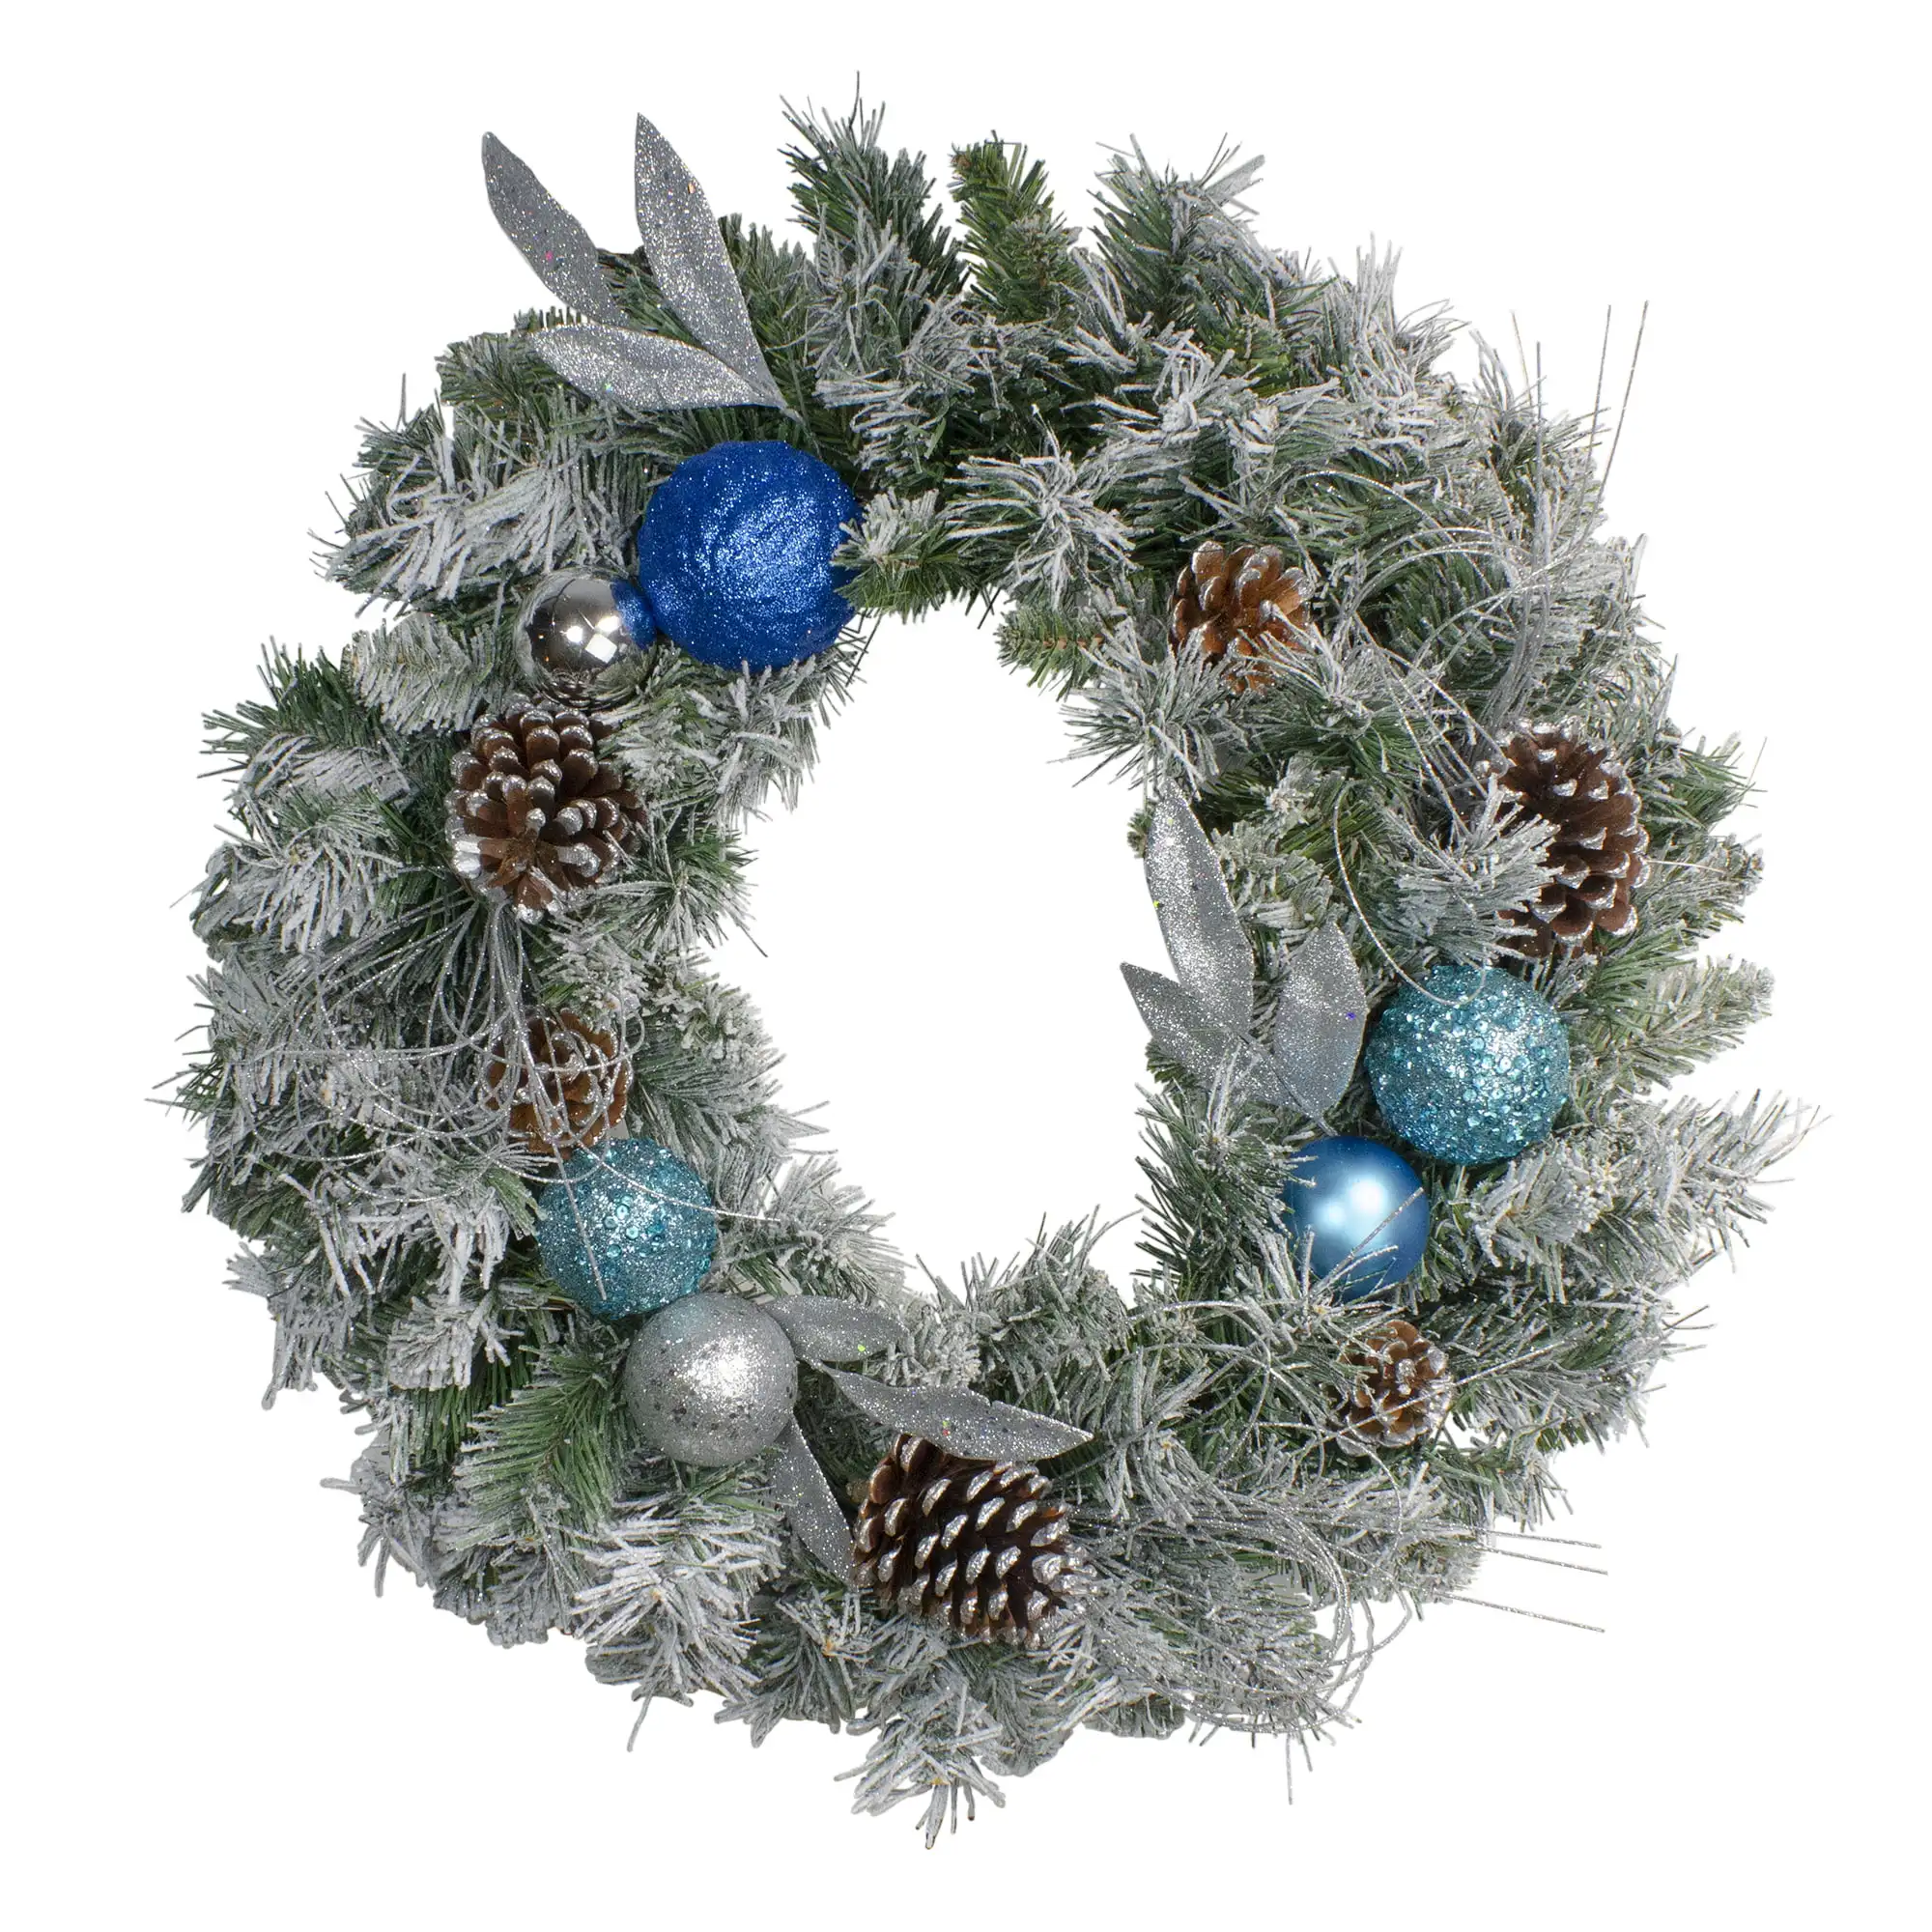 

24" Teal and Silver Ball Flocked with Pine Cones Artificial Christmas Wreath - Unlit